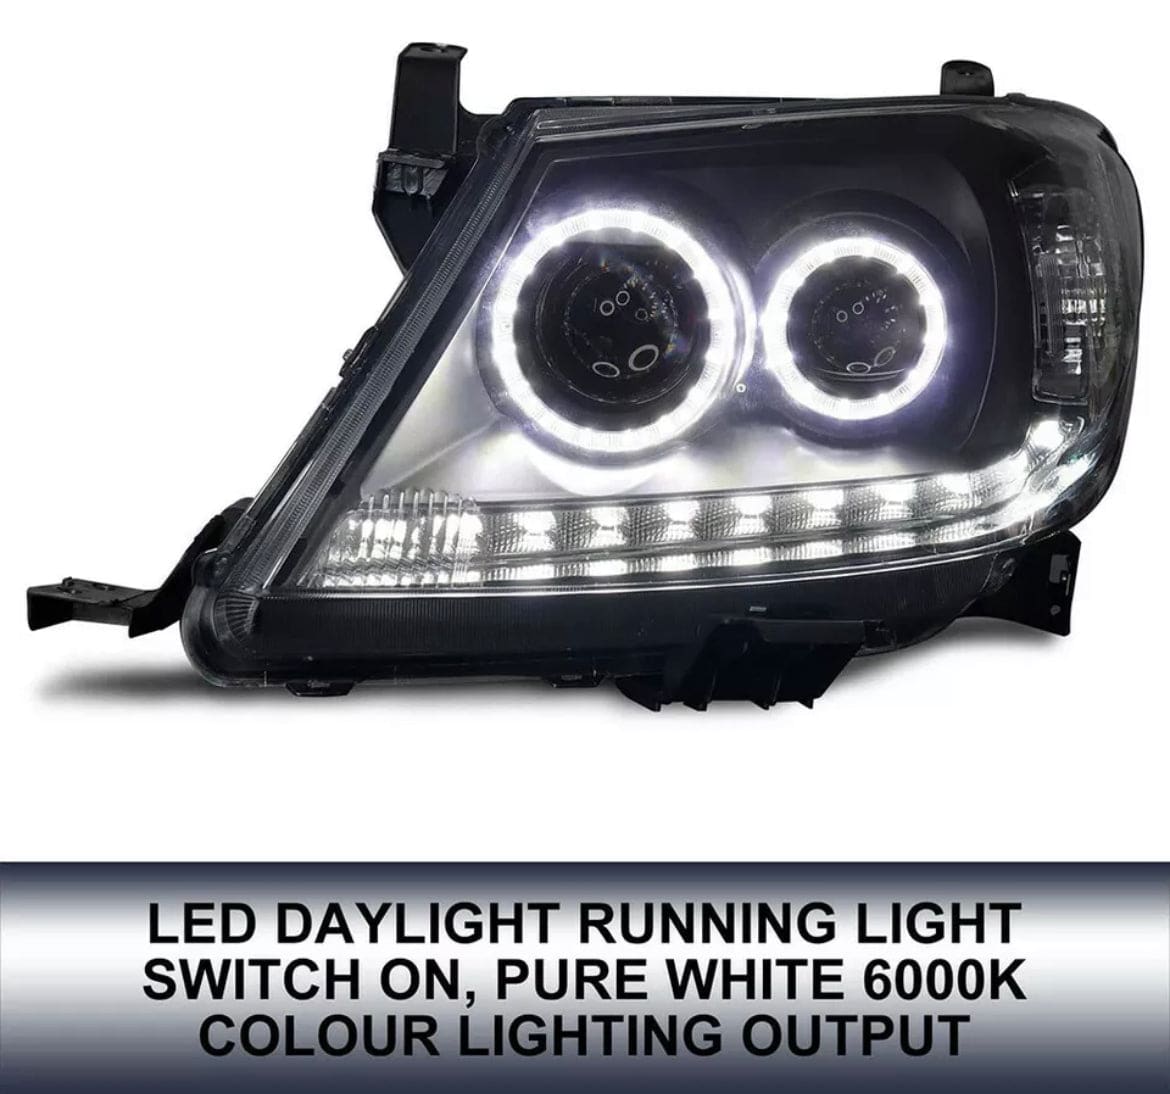 Projector Halo Headlight Suits Toyota Hilux 05-11 (Online Only)